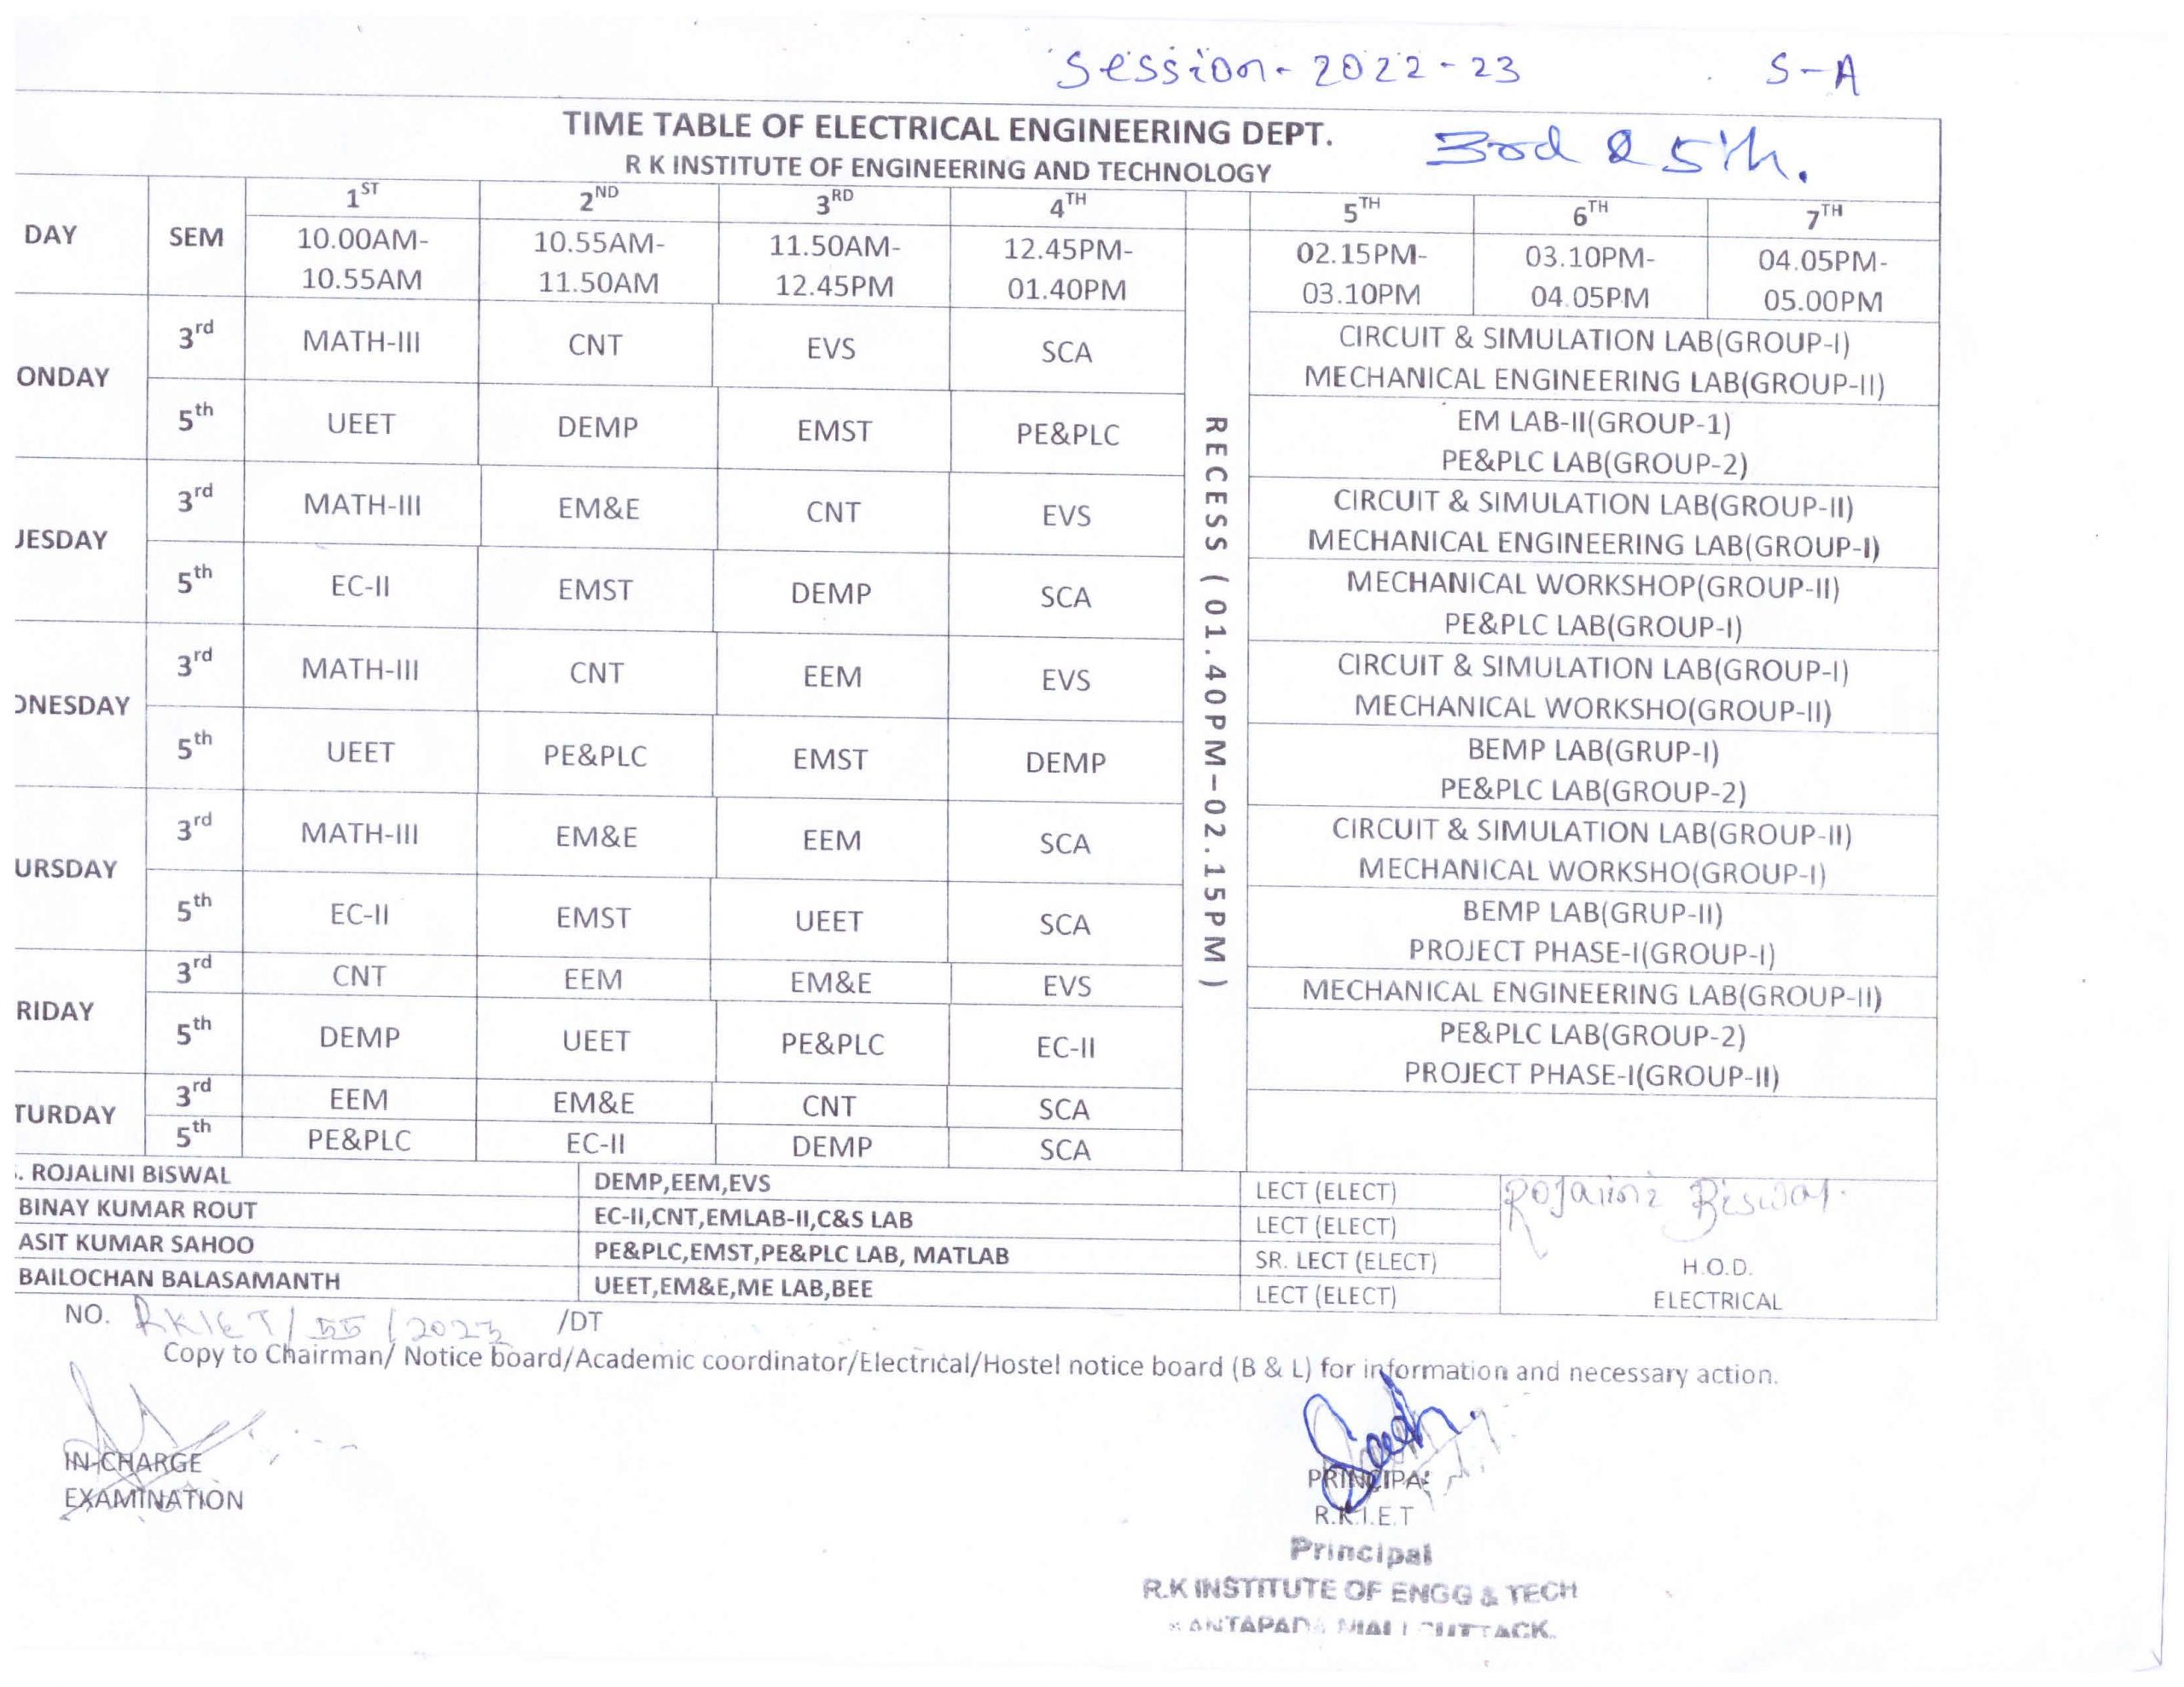 Electrical 2022-23 Time table 3rd & 5th -001 